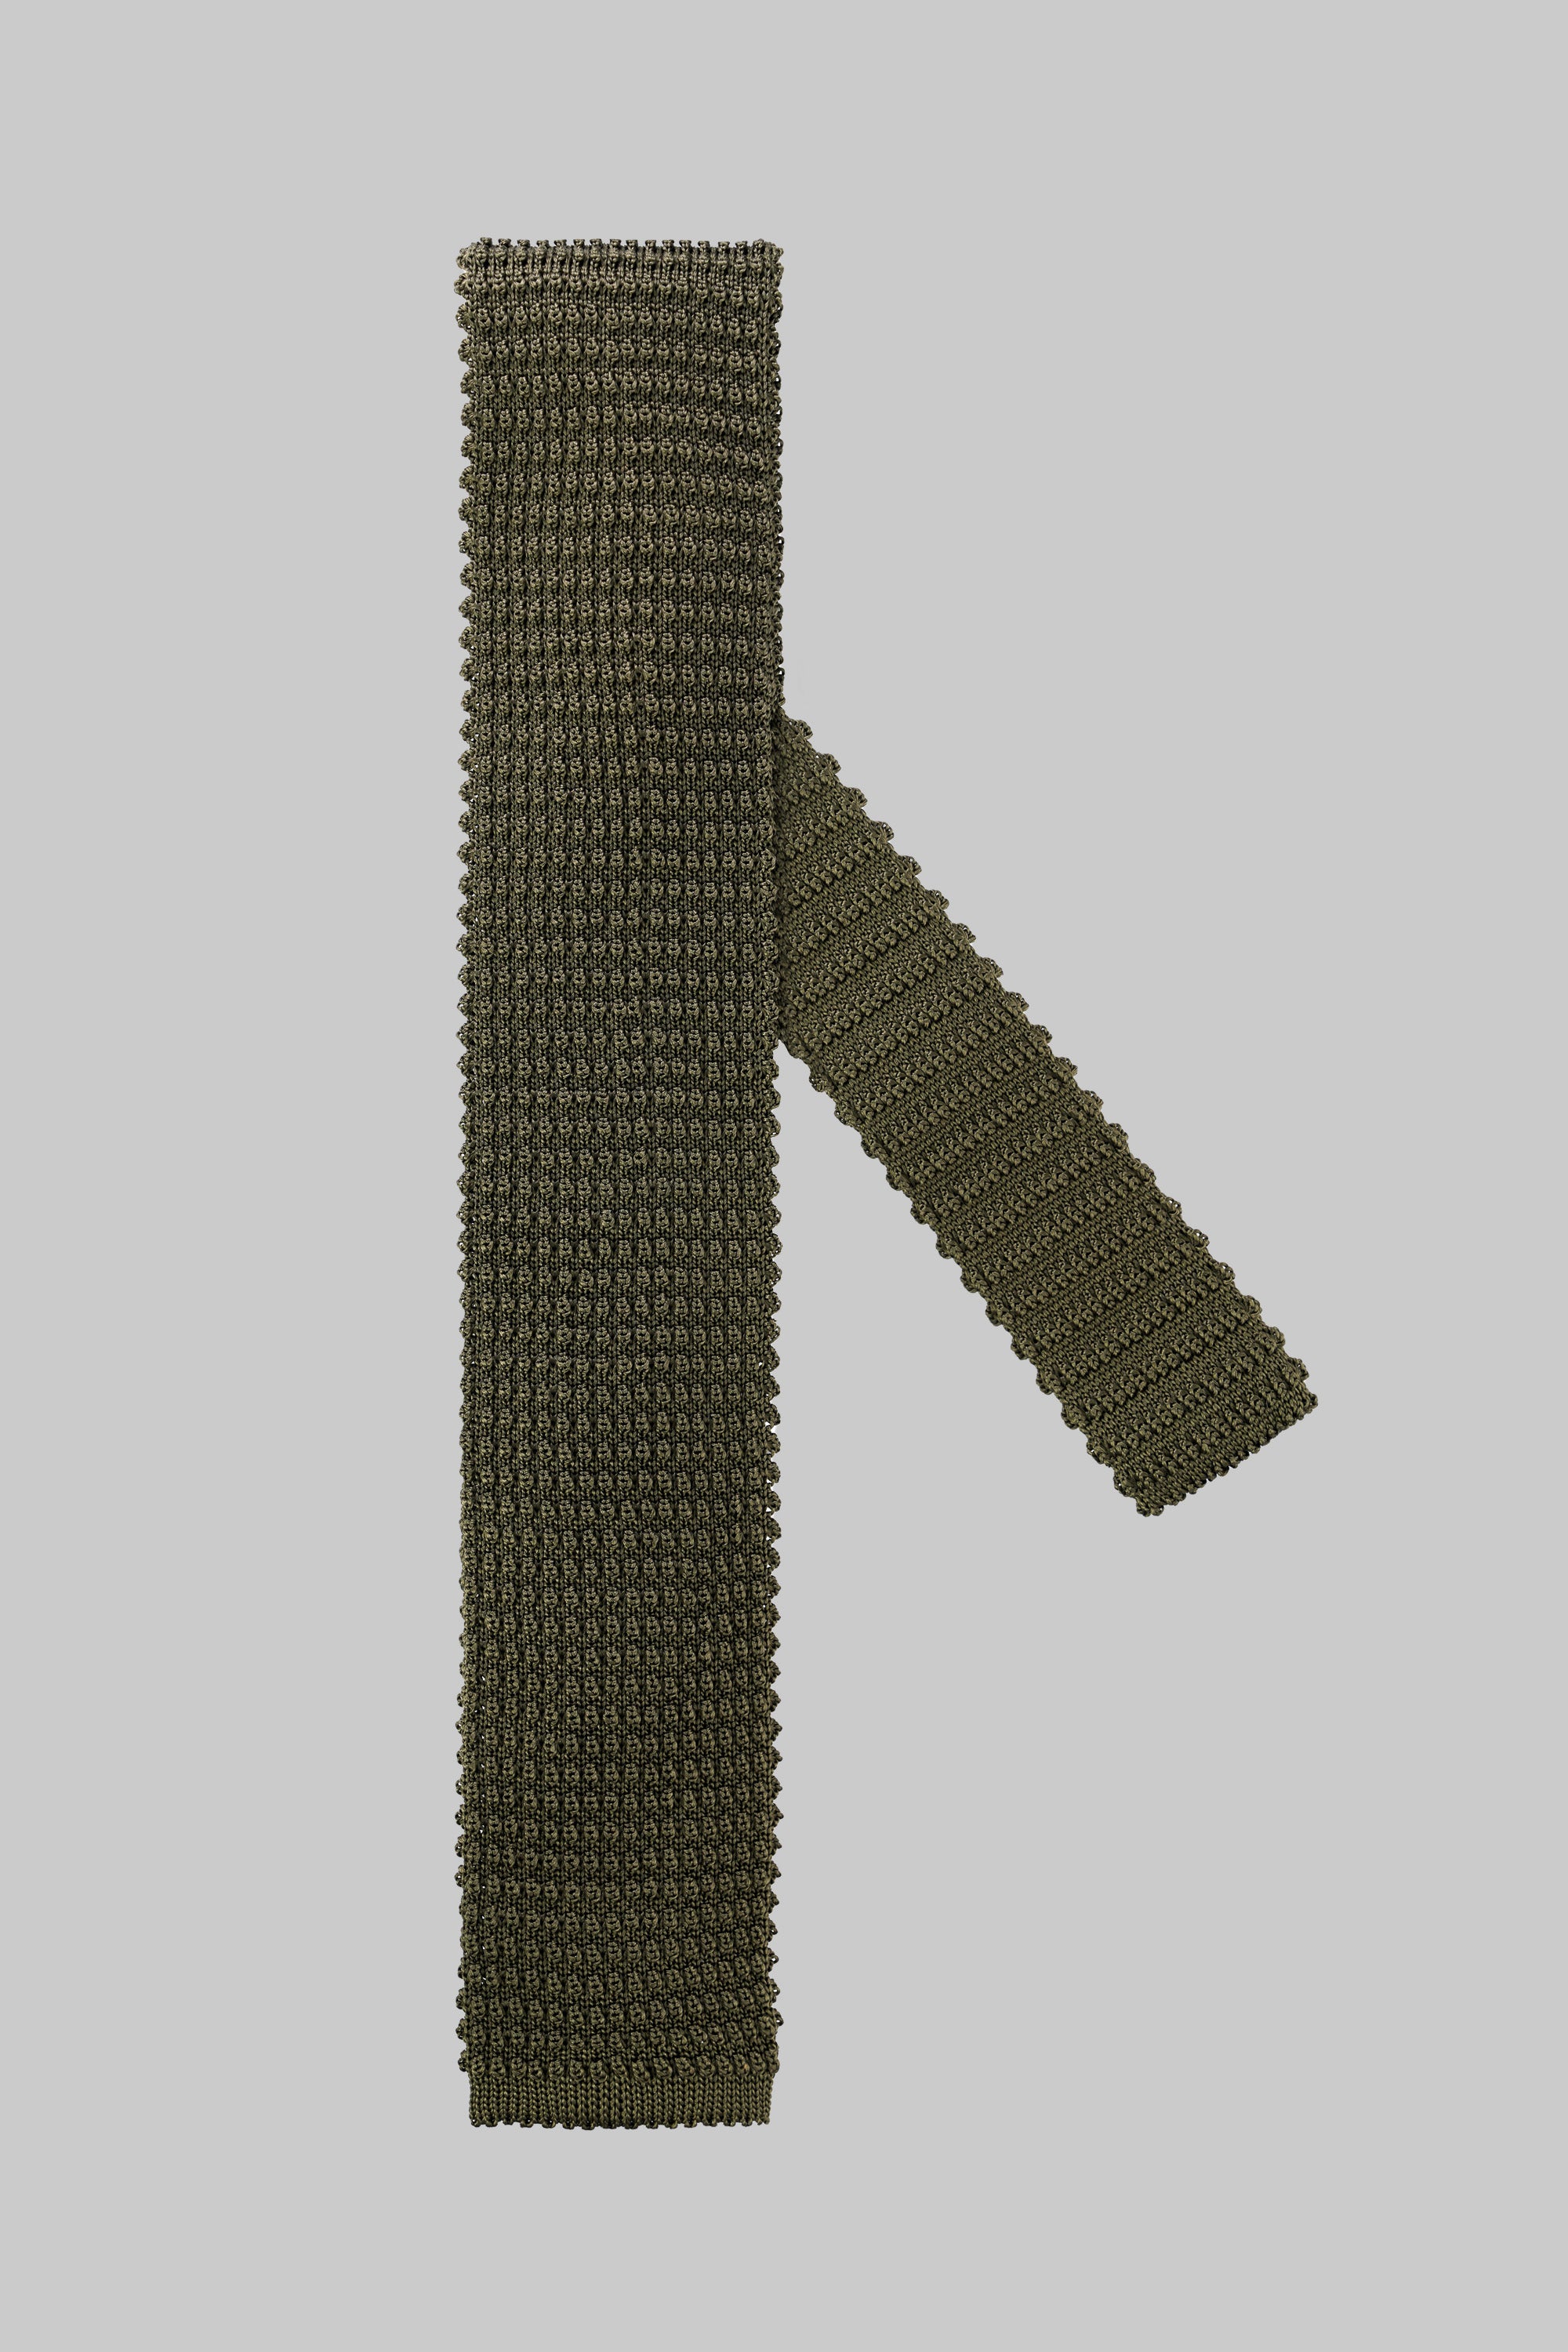 Image of Hudson Silk Knitted Tie in Olive-Jack Victor